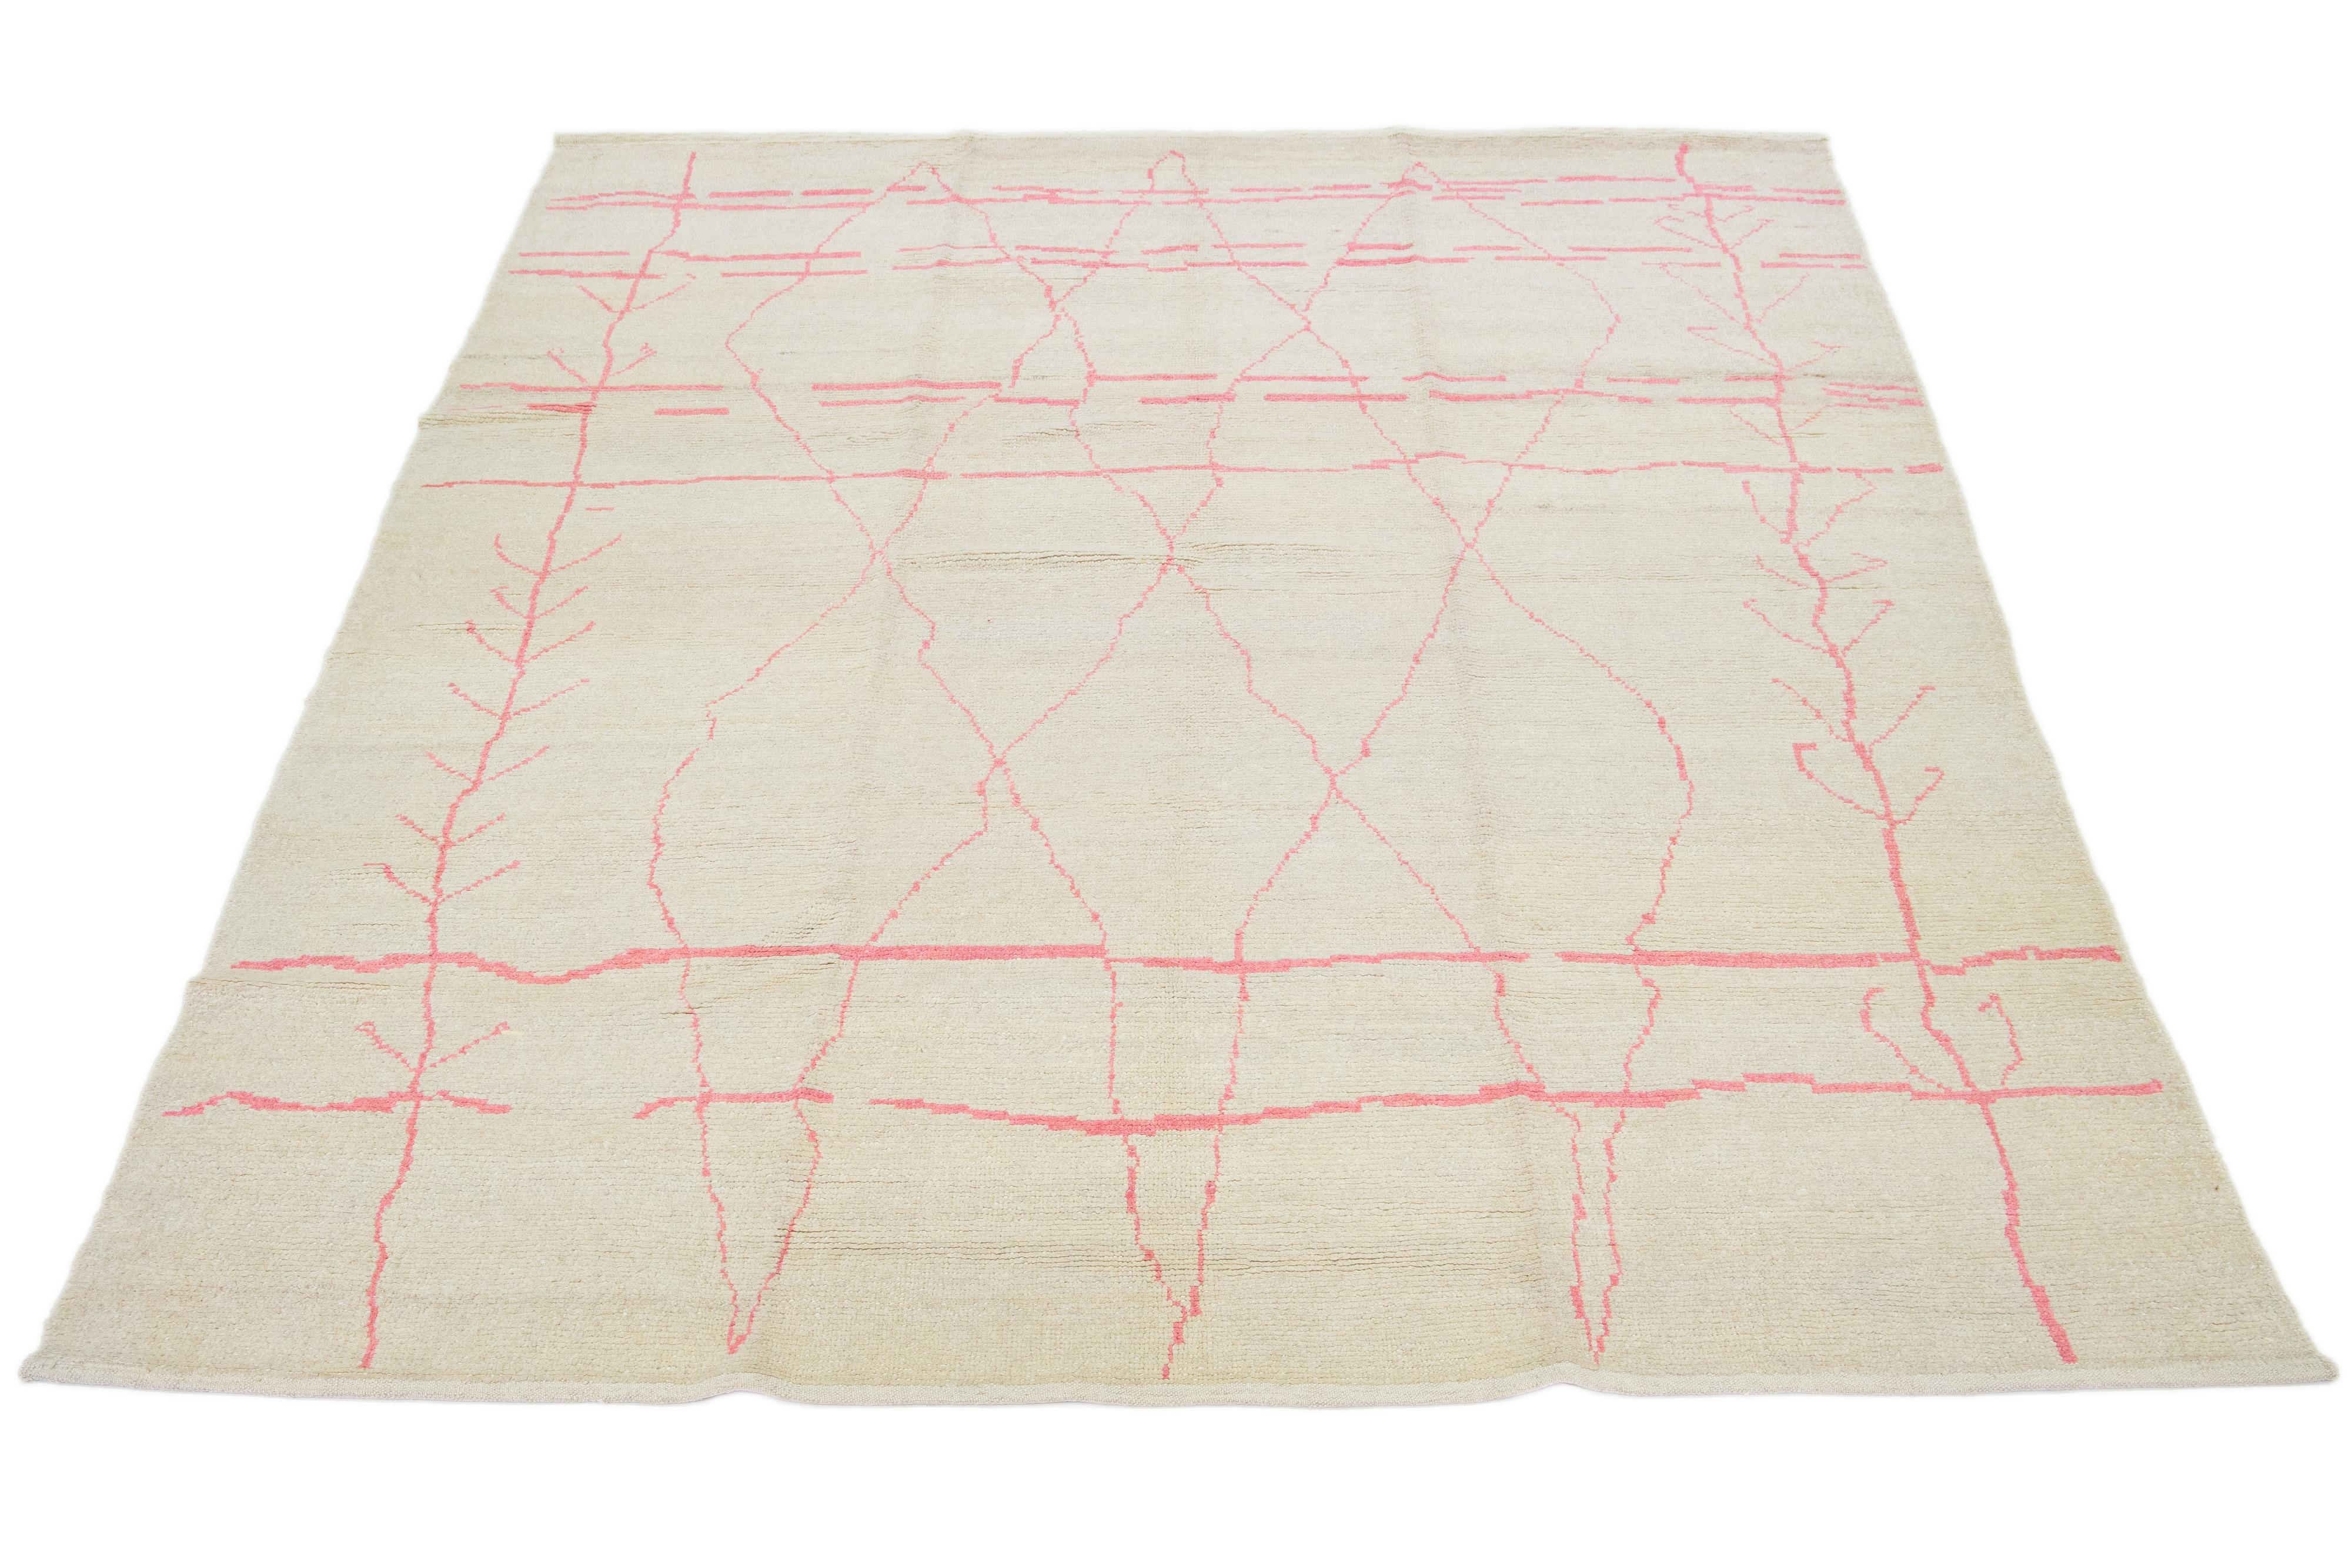 Beautiful Moroccan-style rug, hand knotted wool with an ivory field, pink accents in a gorgeous all-over tribal design.

This rug measures 9' x 12' 2